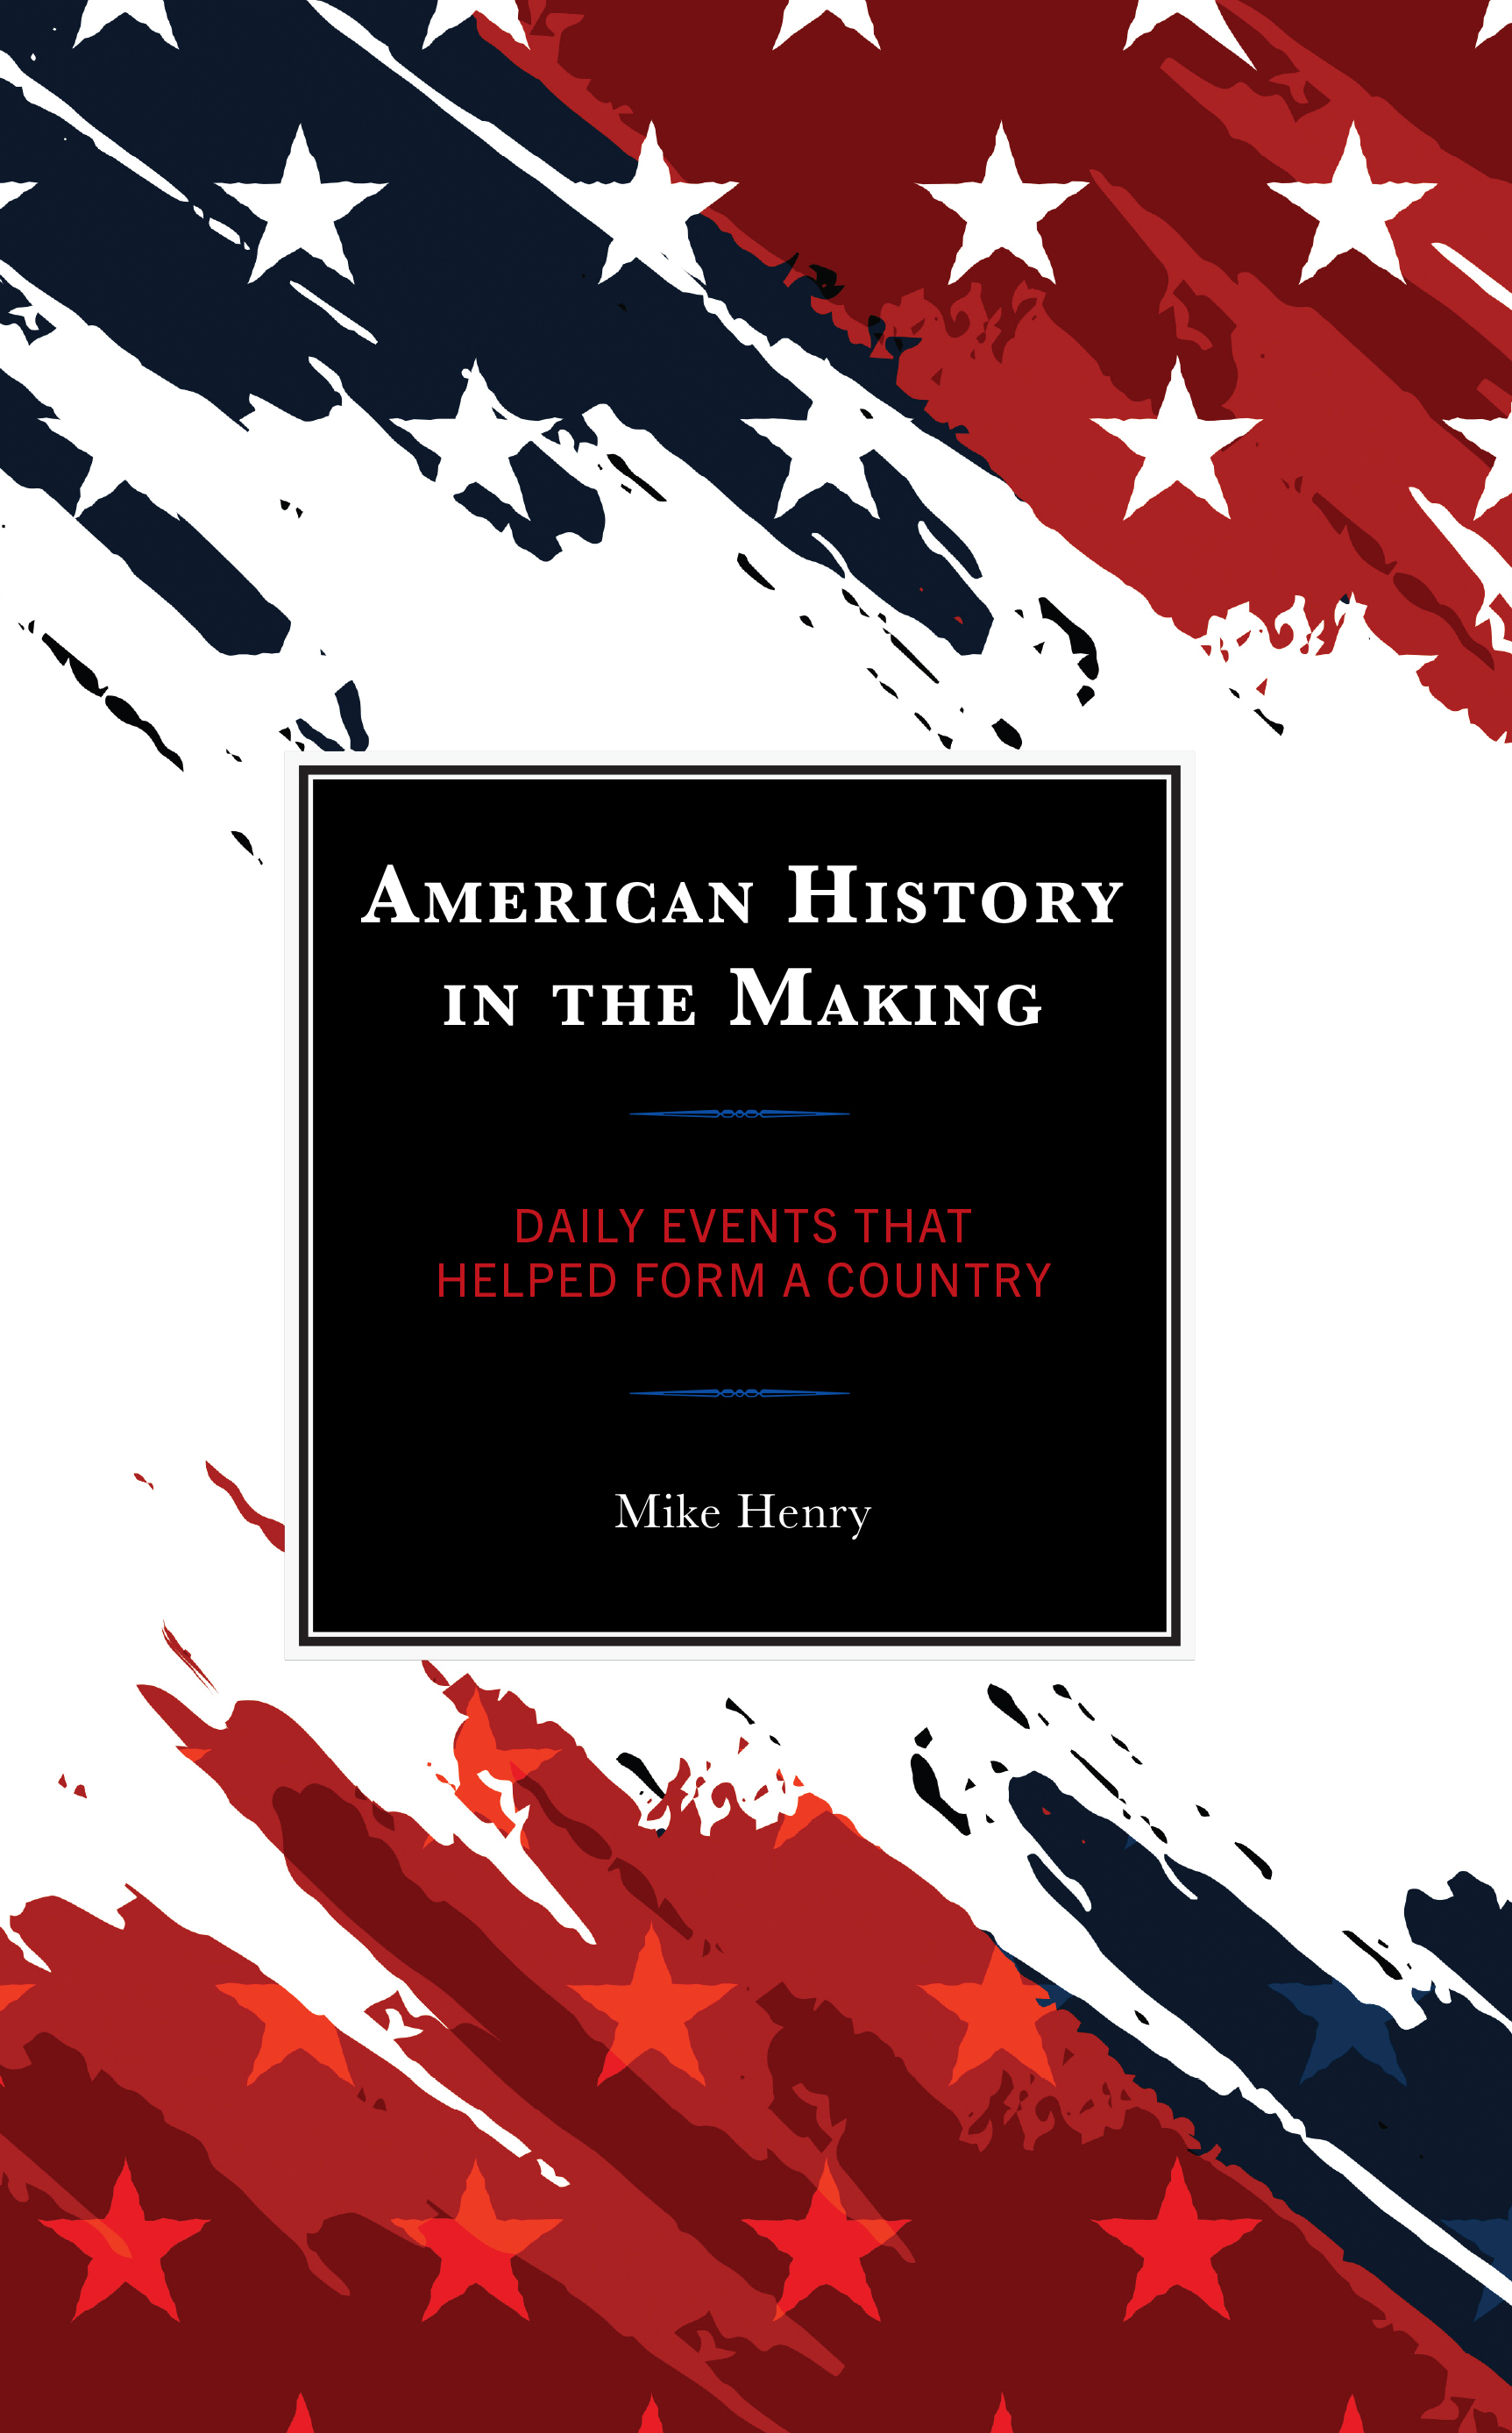 American History in the Making: Daily Events That Helped Form a Country